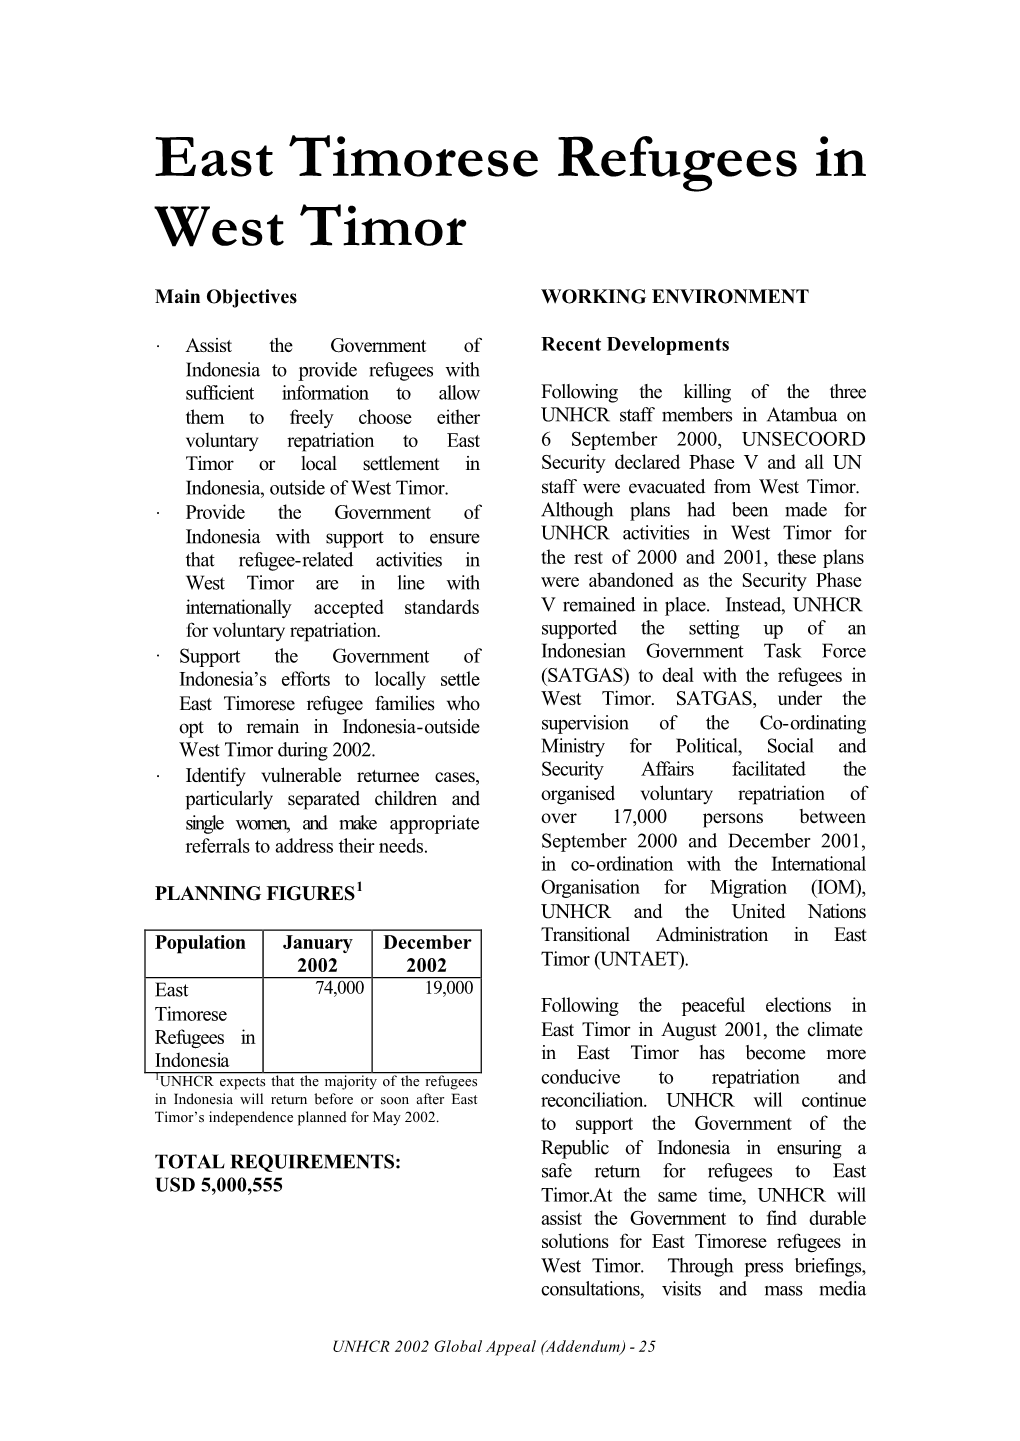 East Timorese Refugees in West Timor